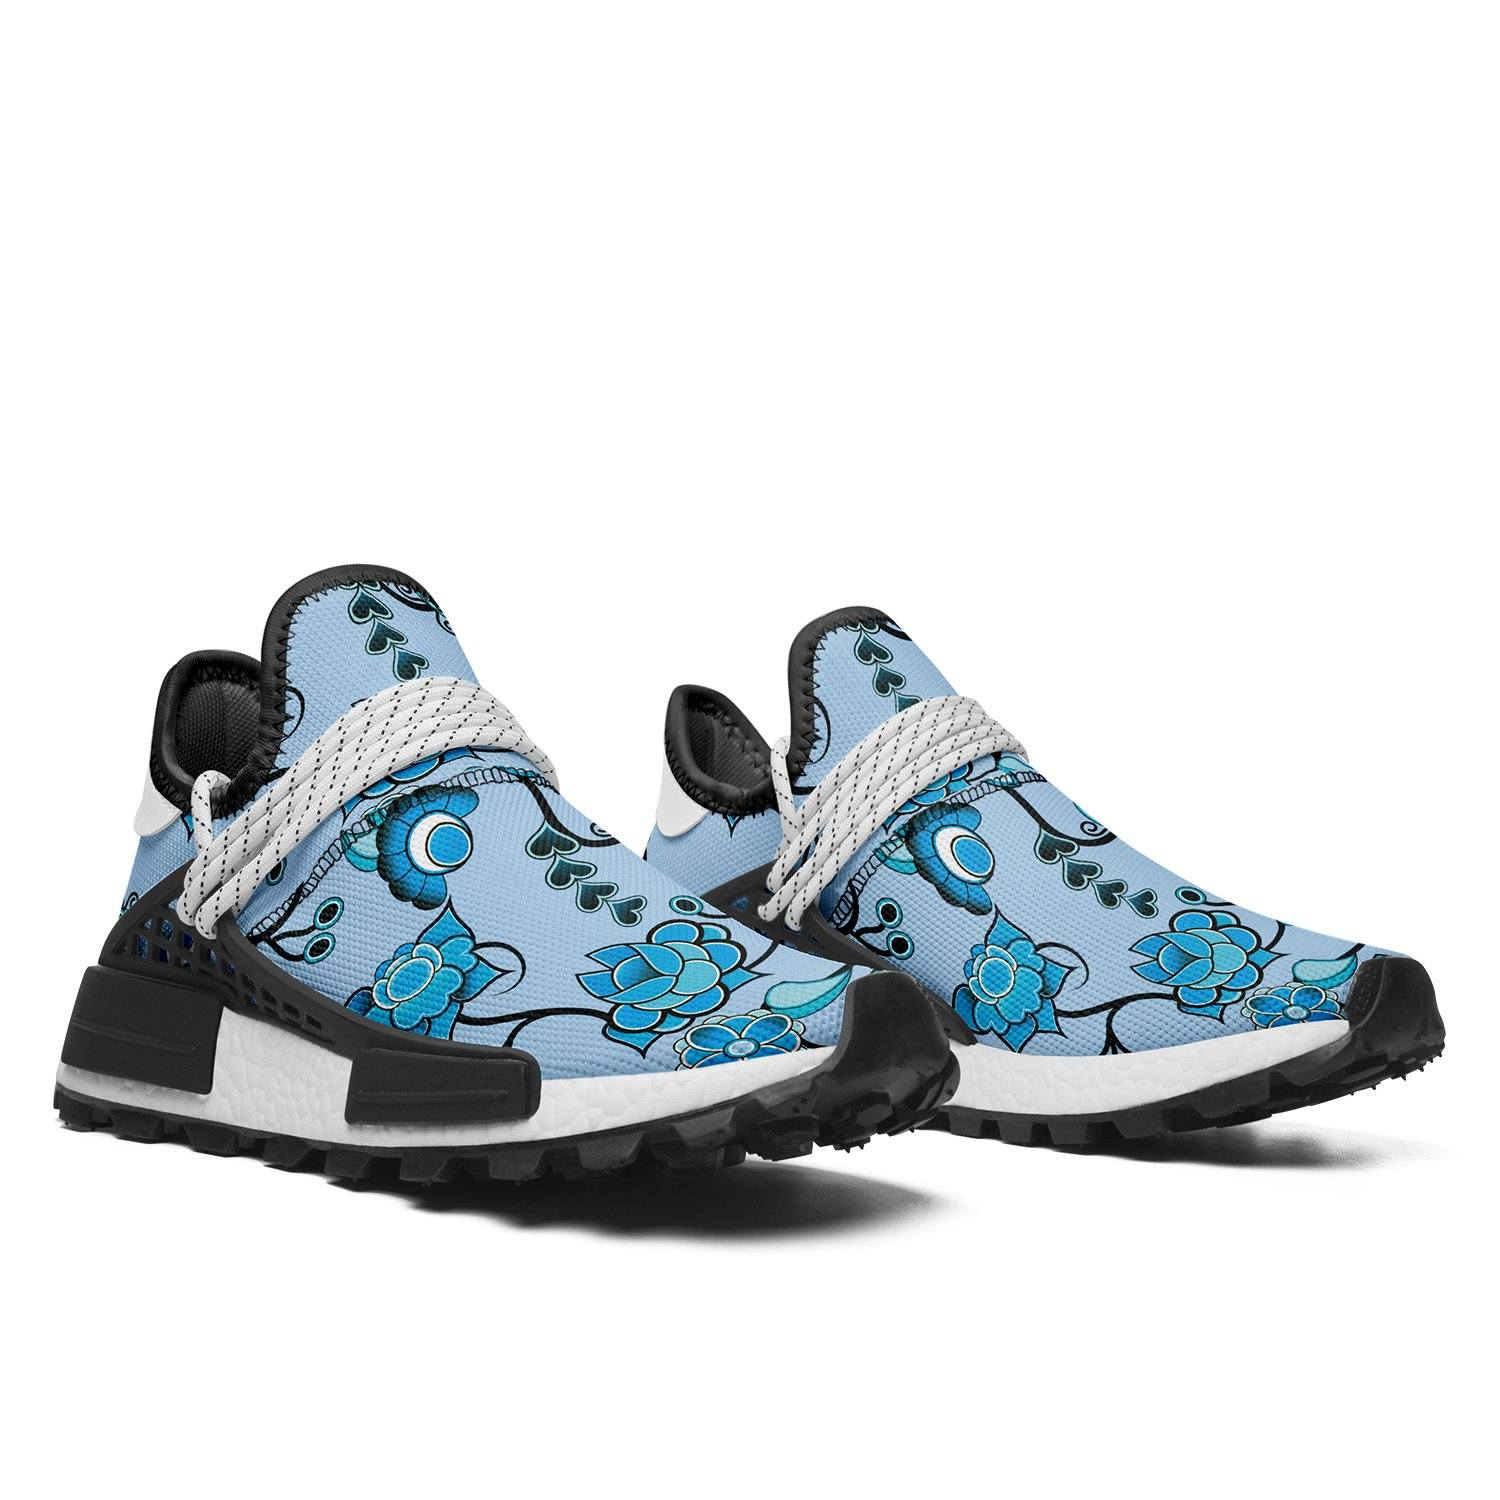 Blue Floral Amour Okaki Sneakers Shoes Herman 